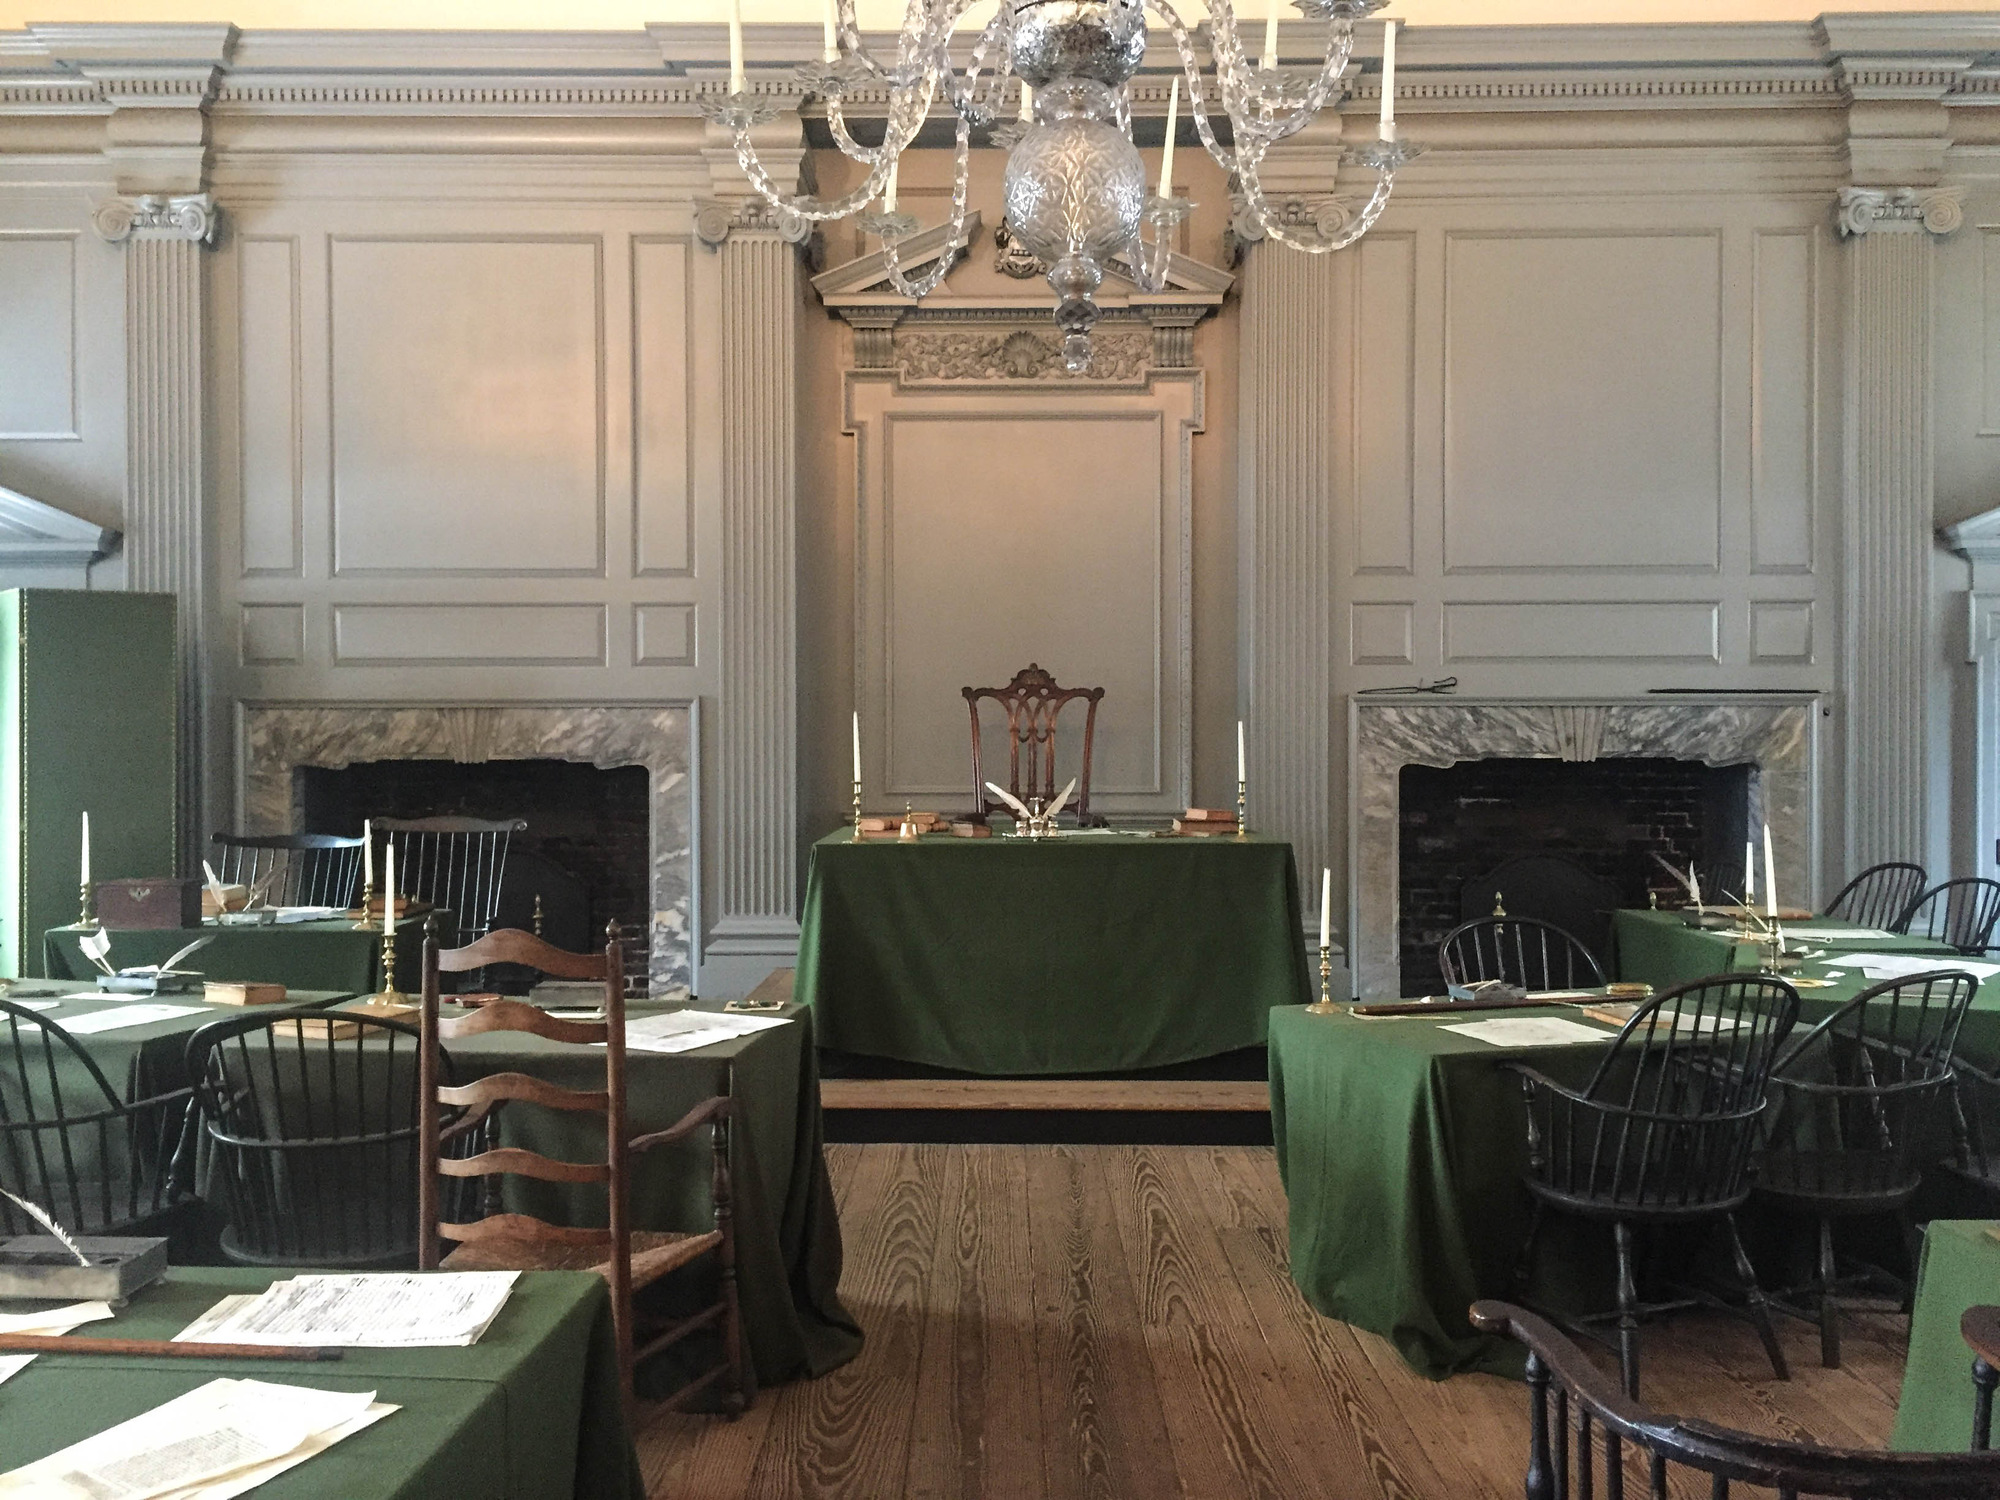 Meeting room with lines of tables and chairs covered with green table cloths, candles, books, papers, and quill pens